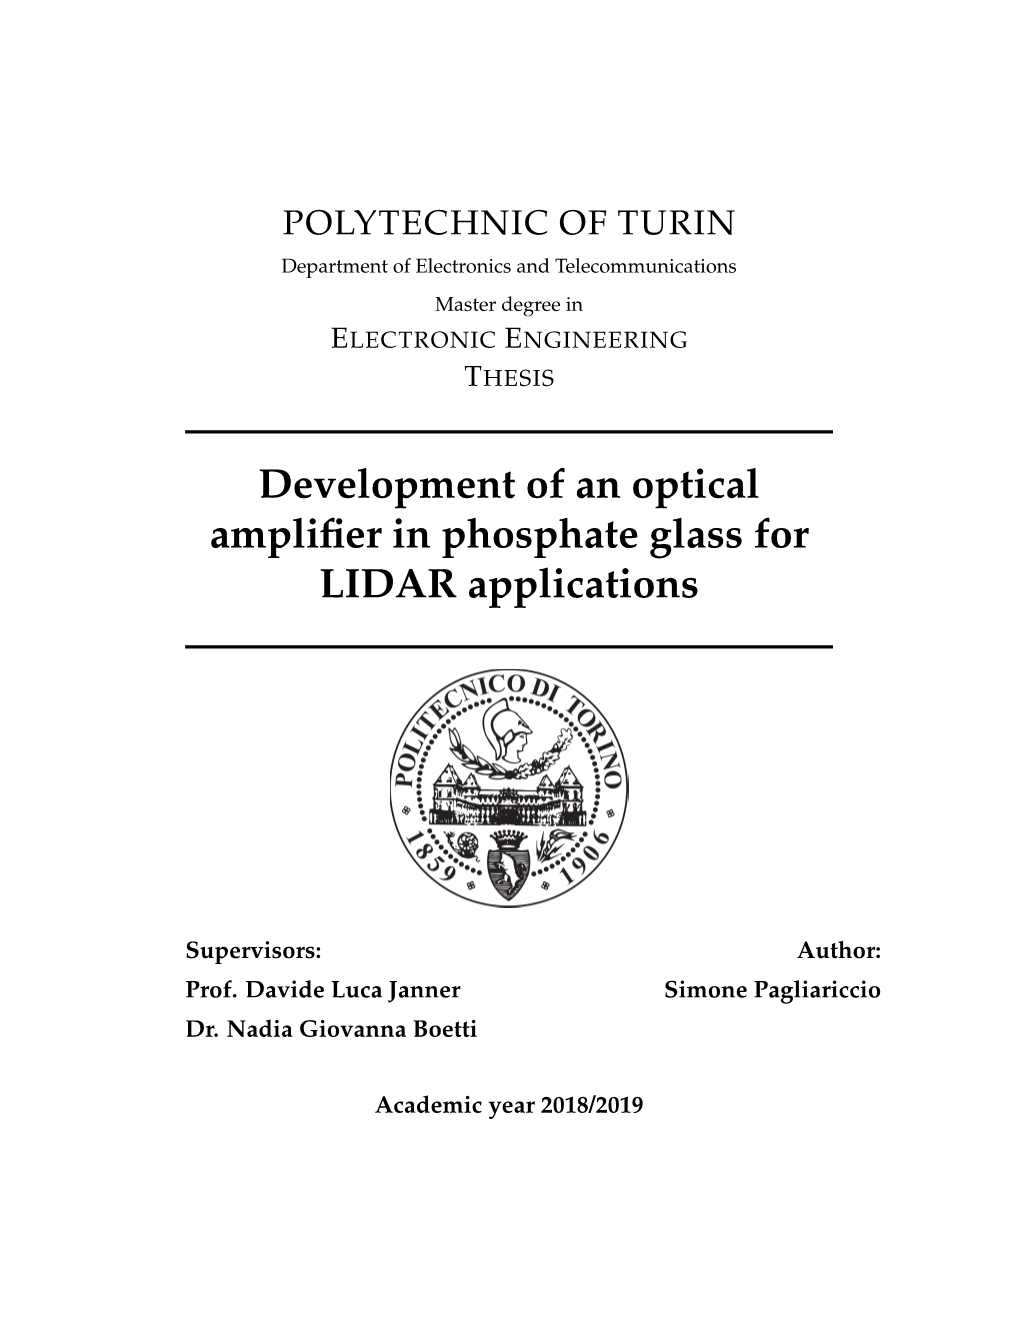 Development of an Optical Amplifier in Phosphate Glass for LIDAR